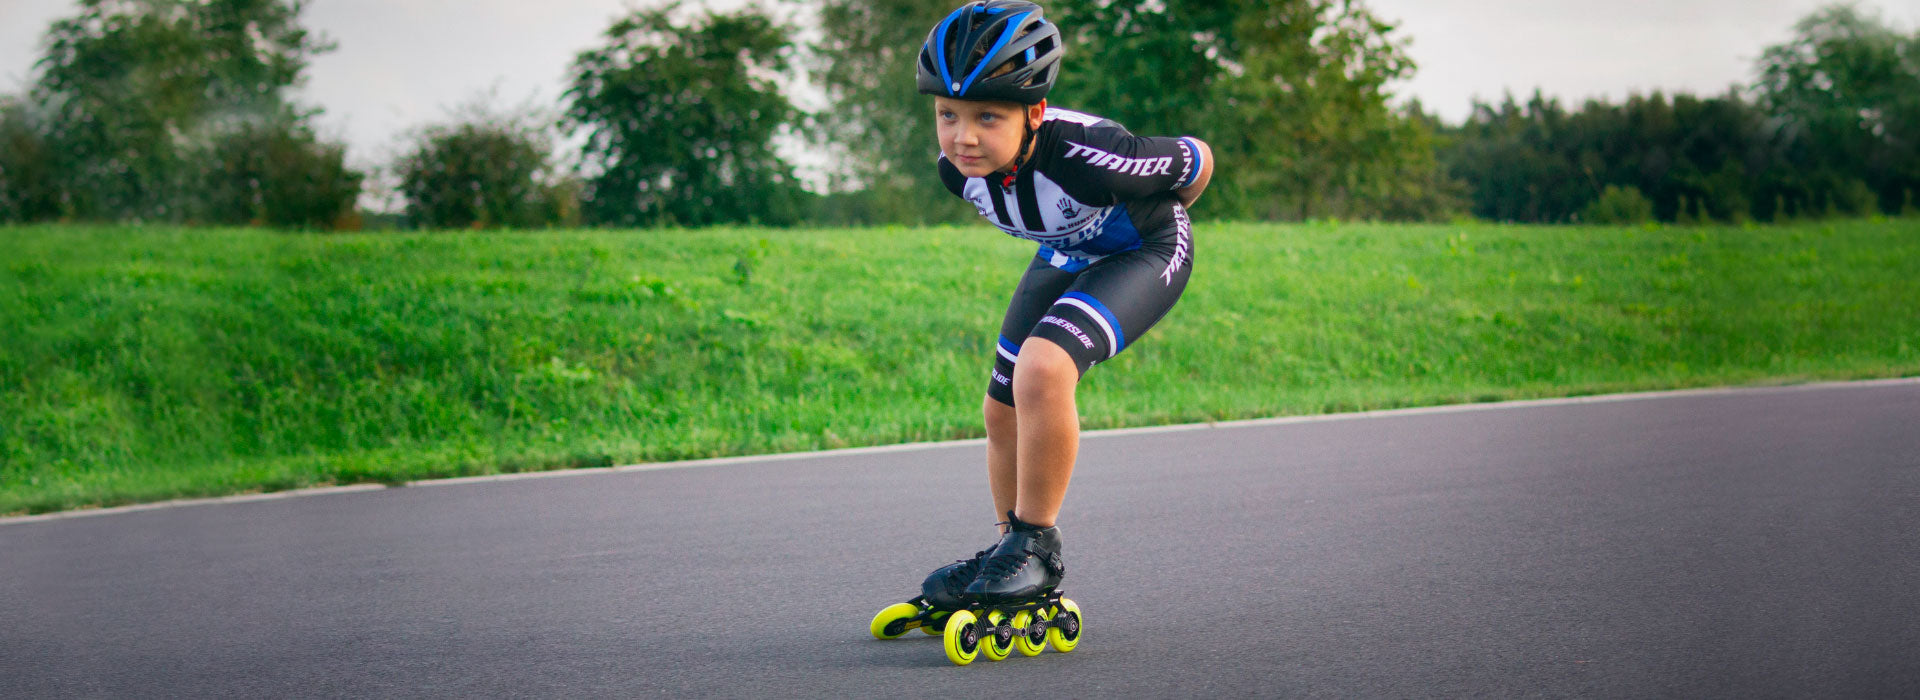 A young boy on smooth pavement mid-stride while using Powerslide inline race skates